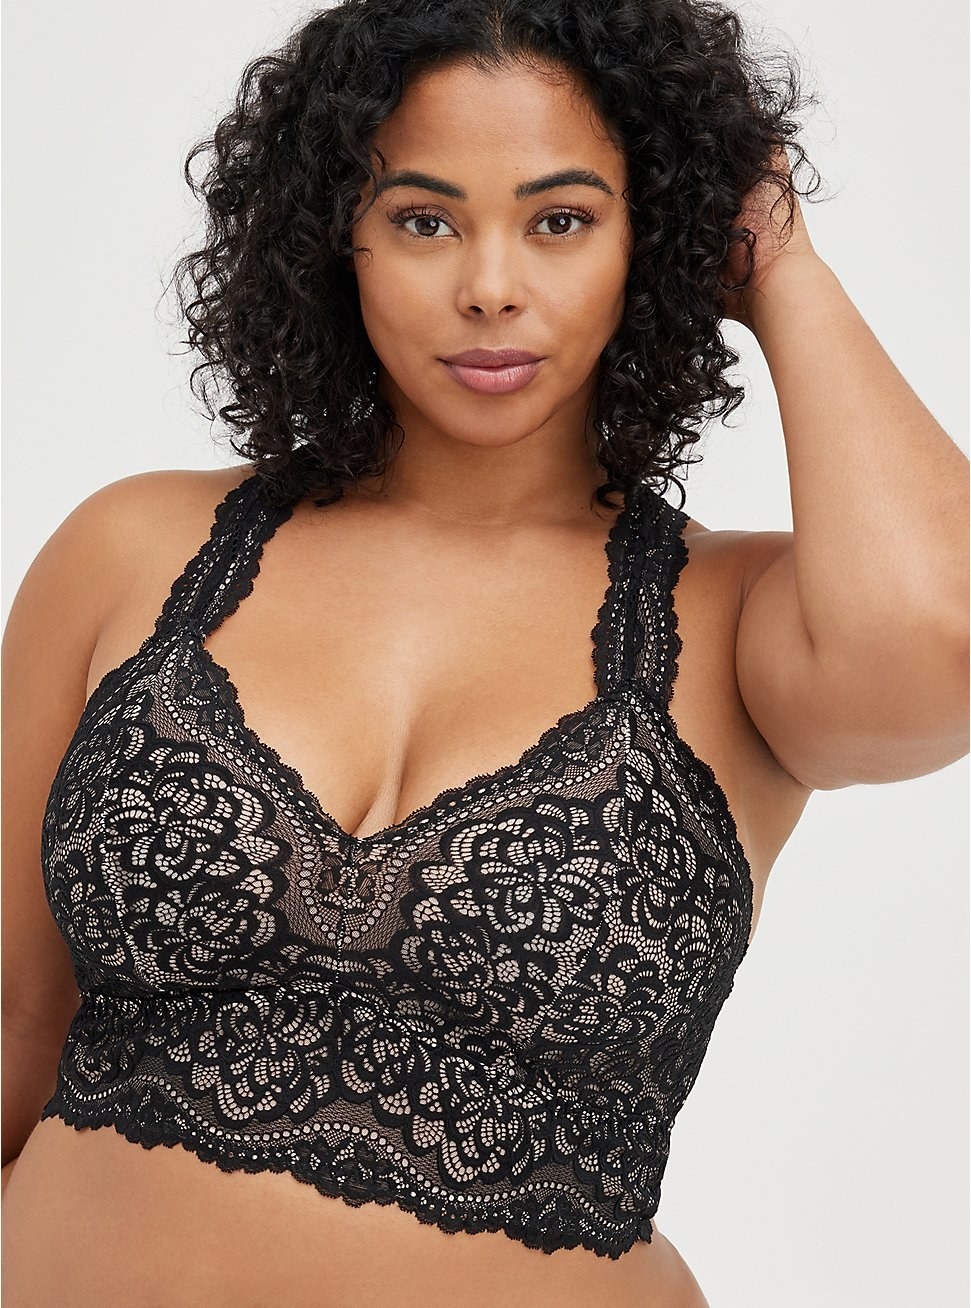 Respond Throat Silently 32 Super Comfy Bralettes That Are Actually Supportive